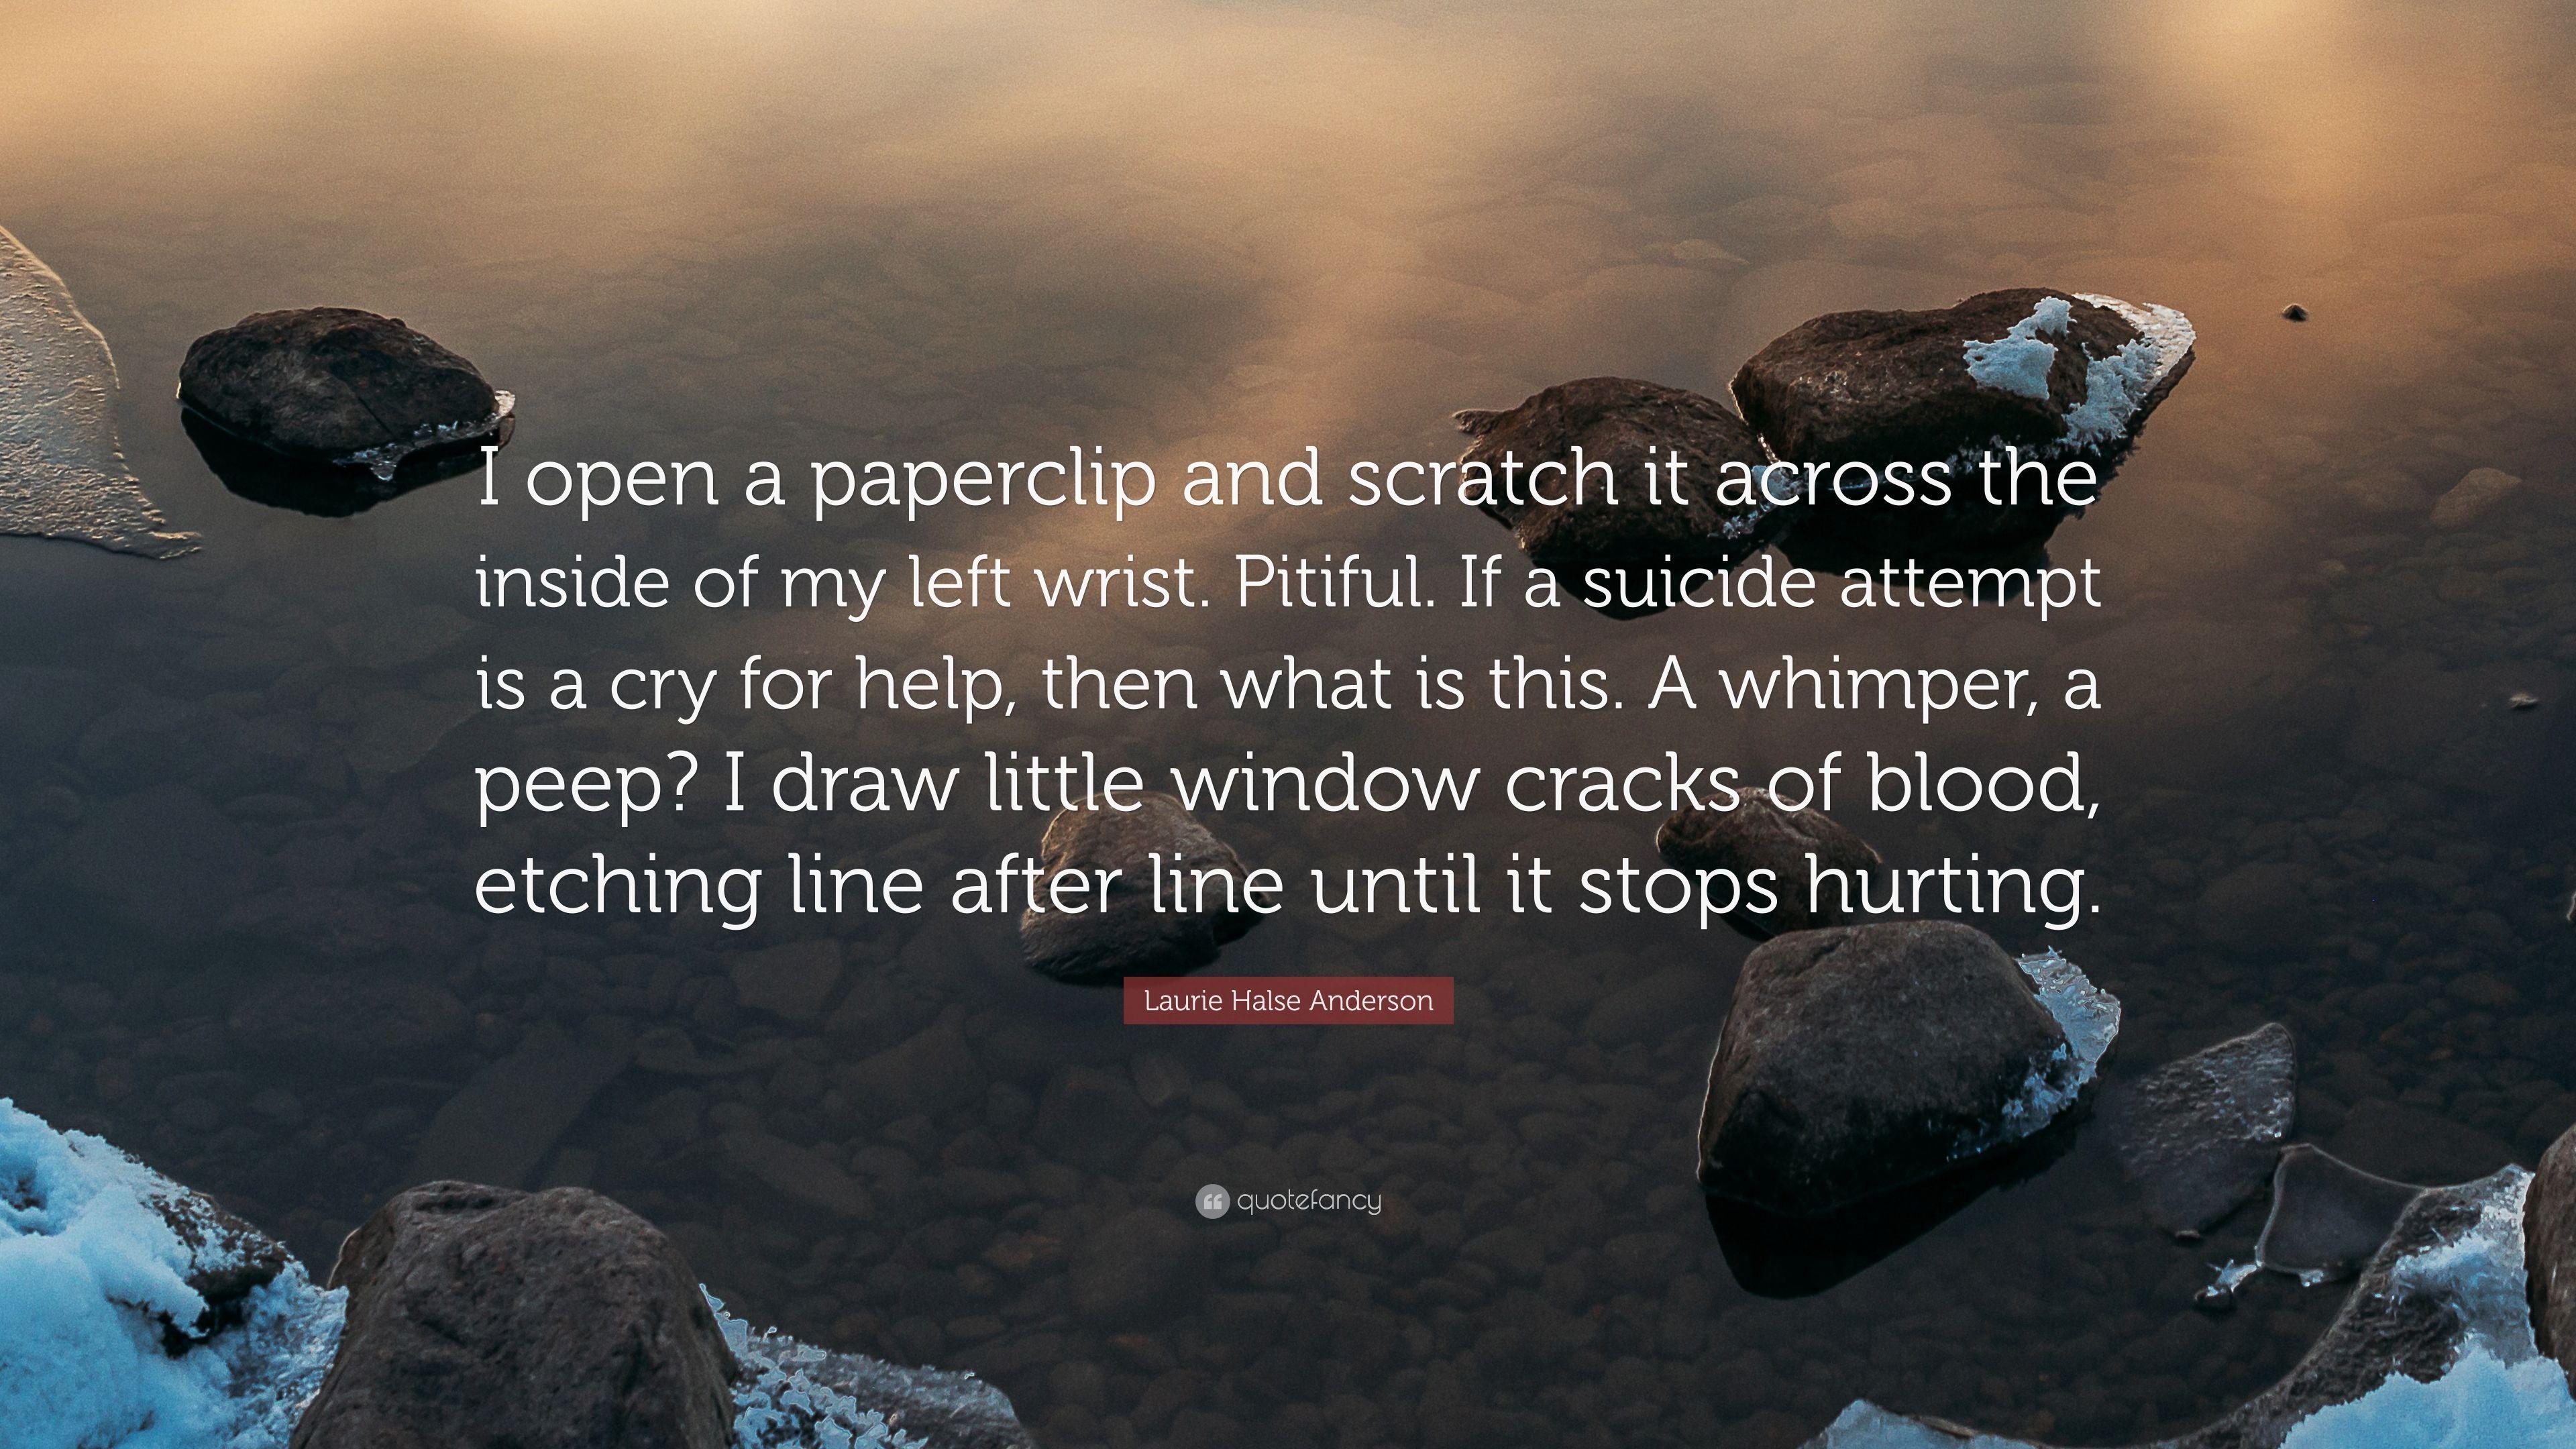 Laurie Halse Anderson Quote: “I open a paperclip and scratch it